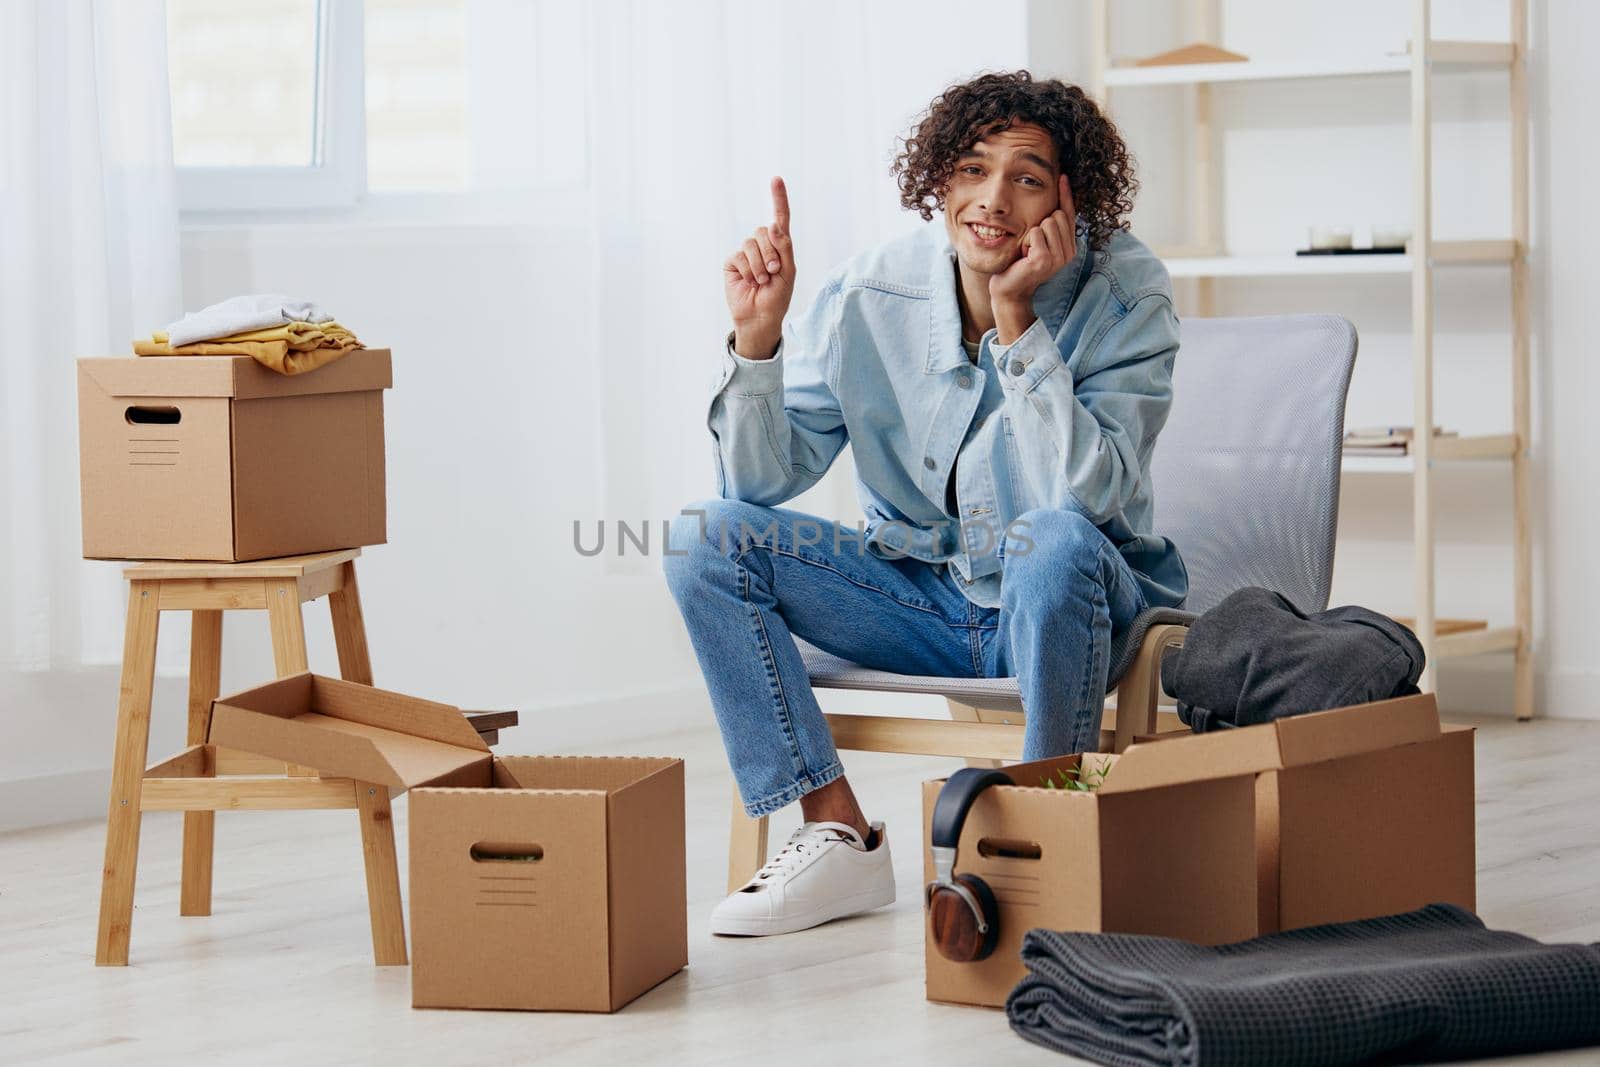 guy with curly hair unpacking things from boxes in the room Lifestyle by SHOTPRIME